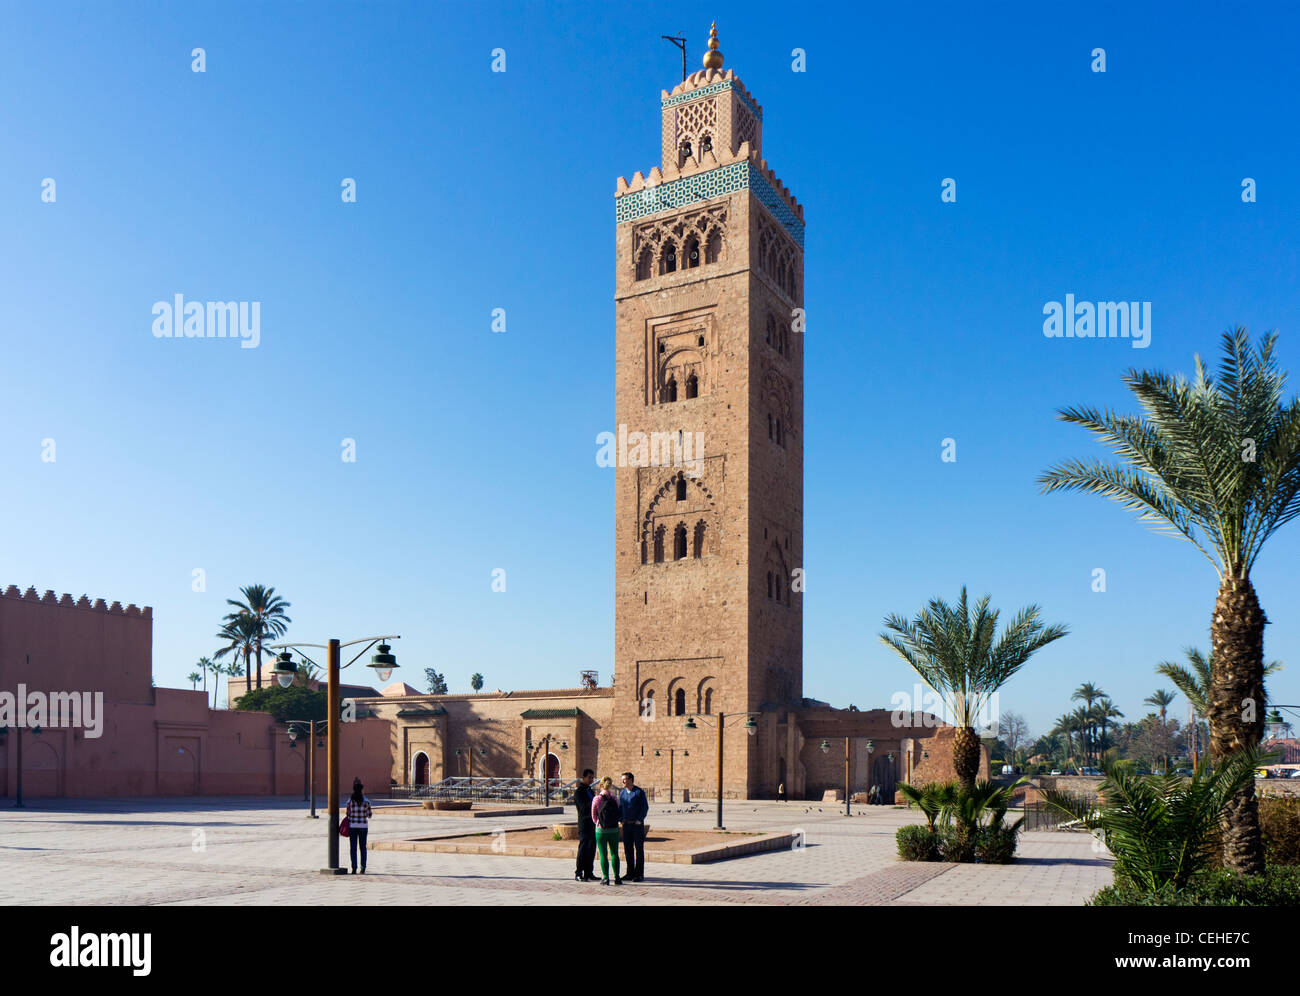 The minaret of the Koutoubia Mosque, Marrakech, Morocco, North Africa Stock Photo